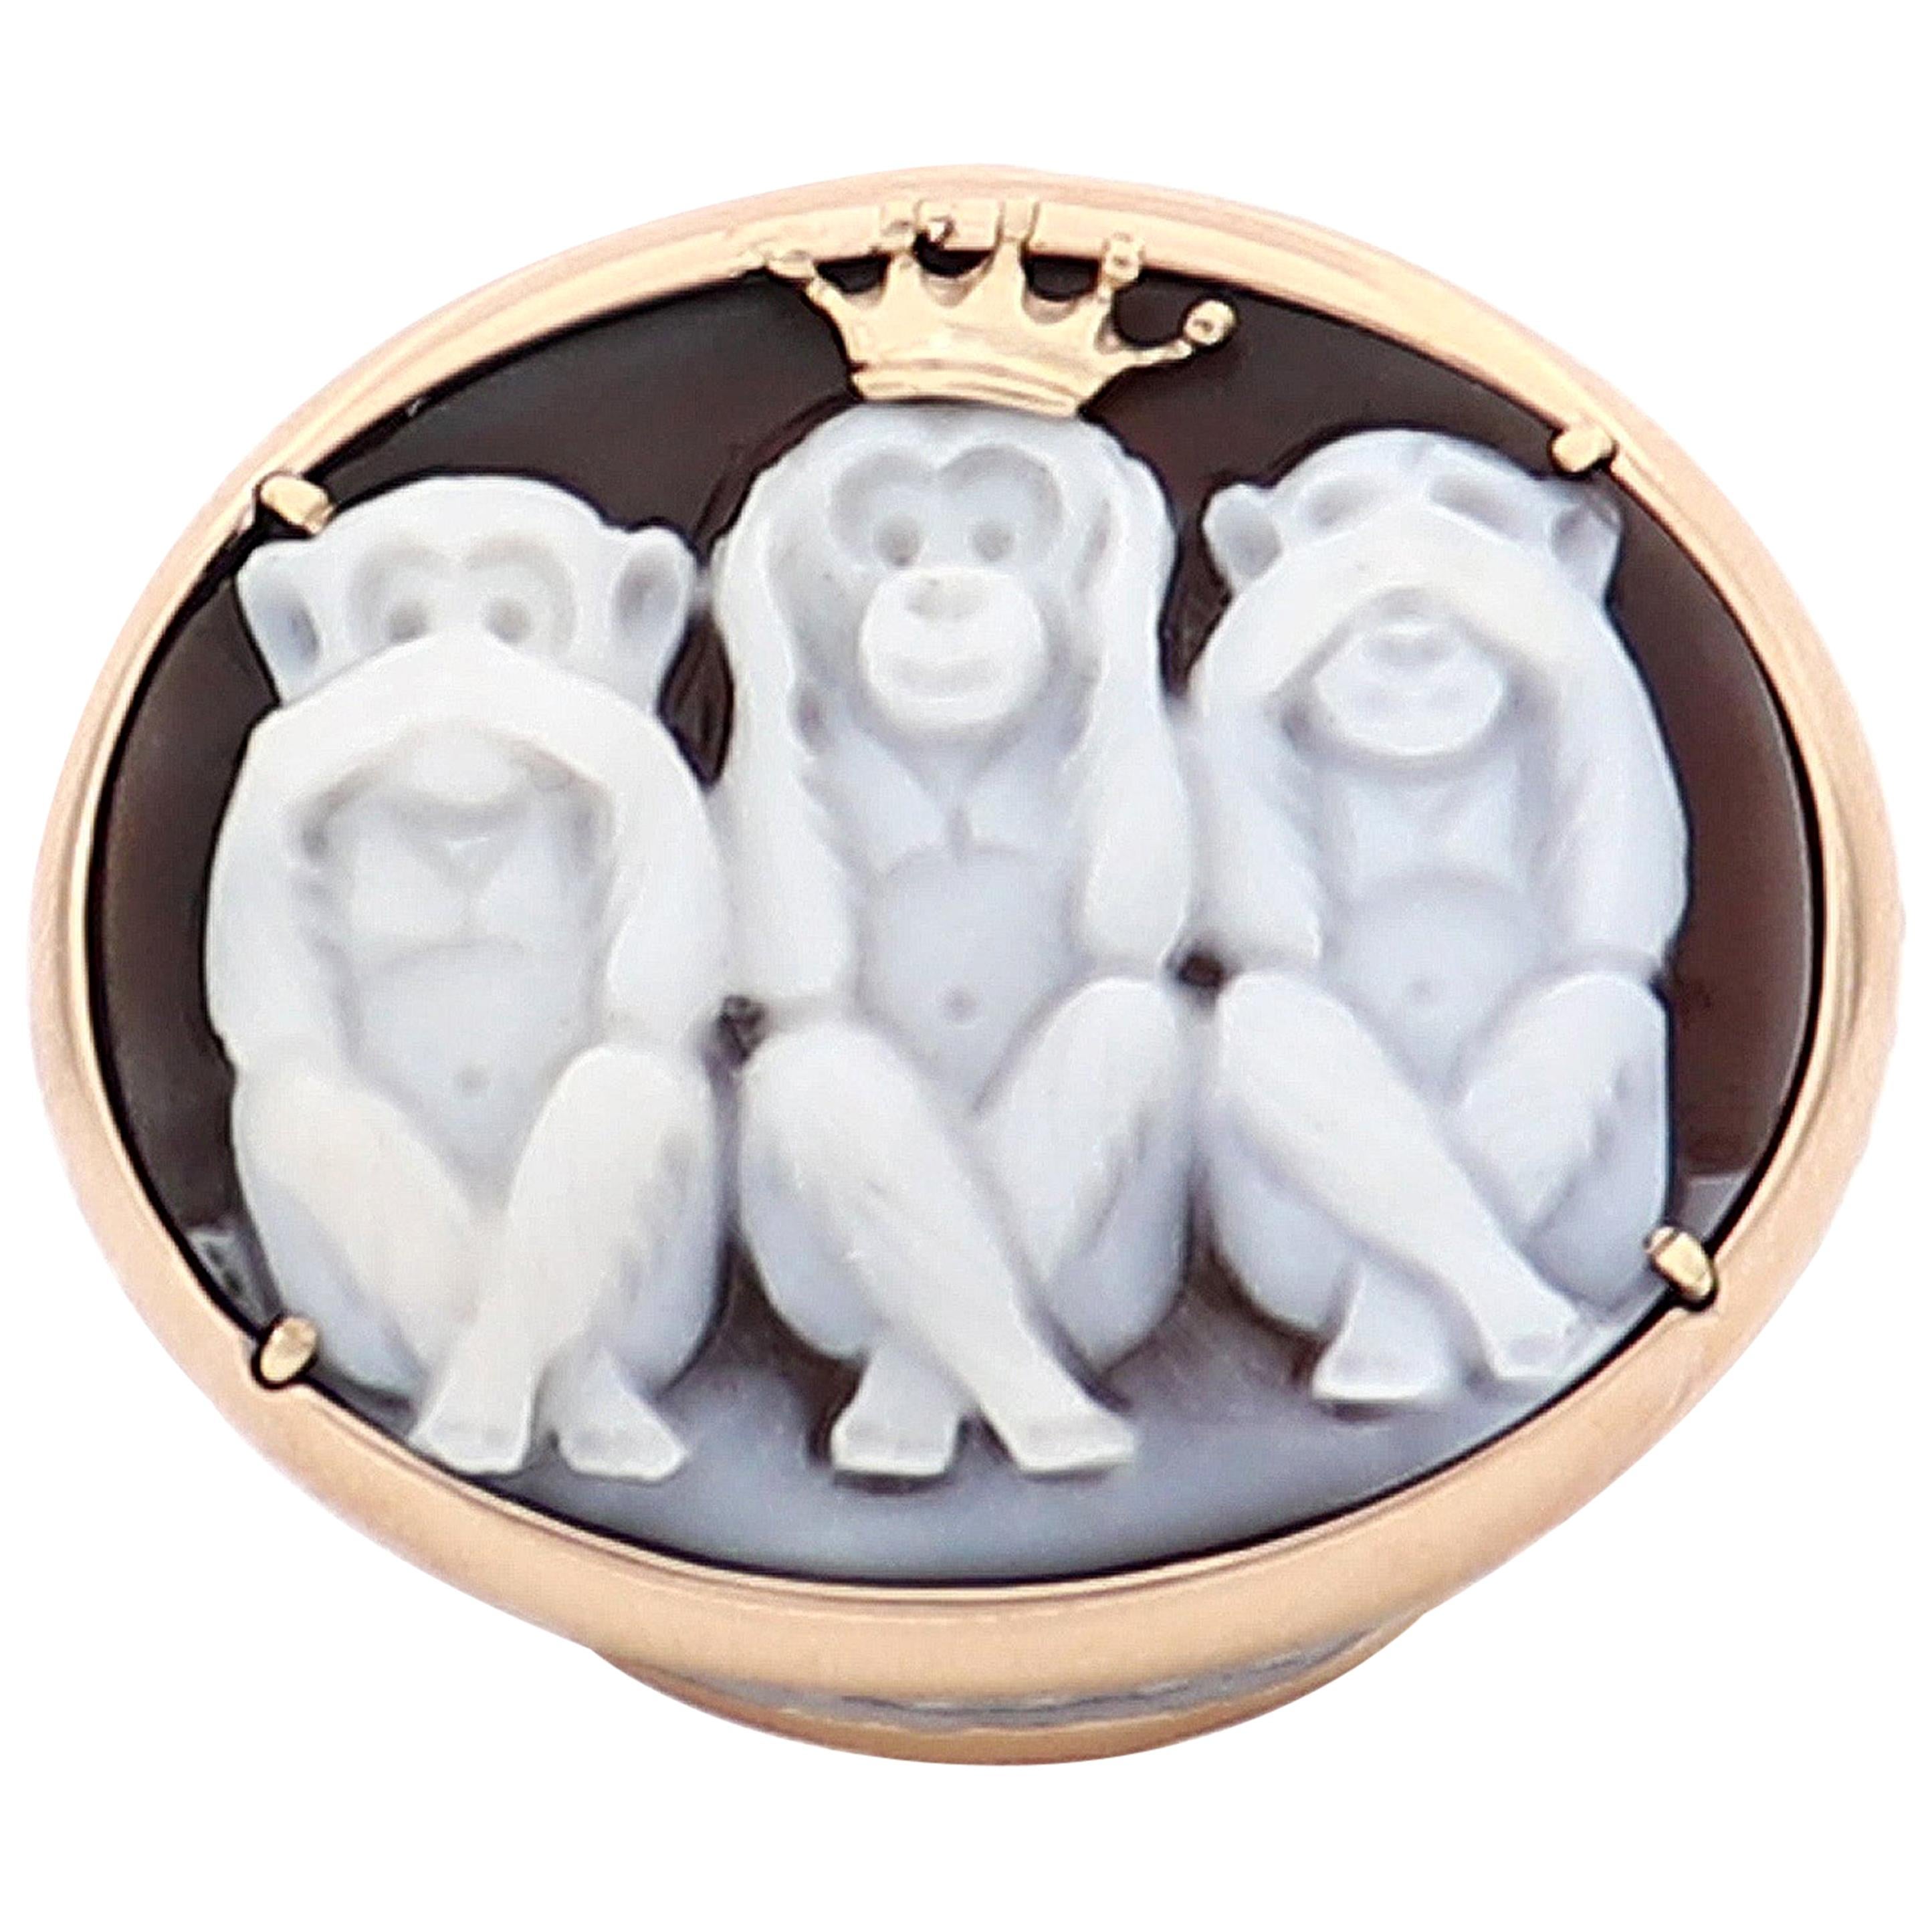 Amedeo "Wise Monkeys" Cameo Ring with 14 Karat Gold